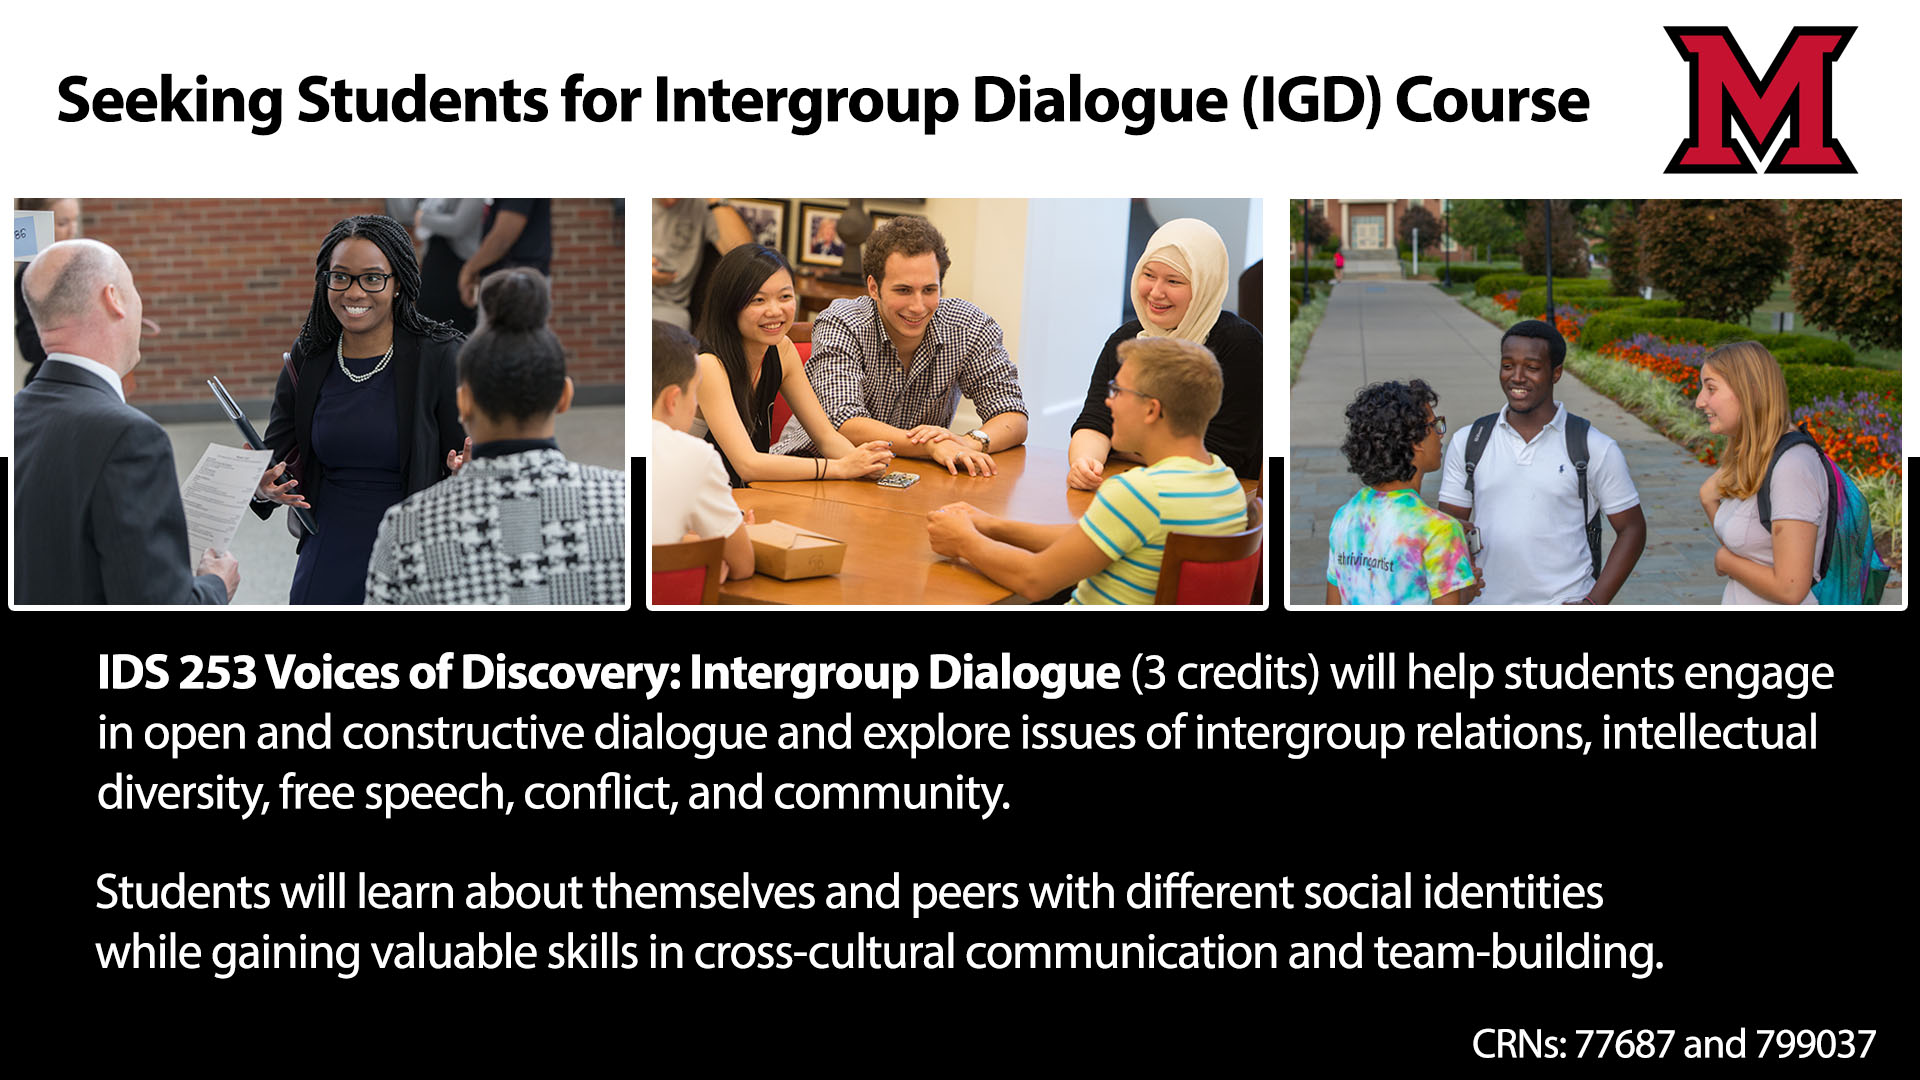 Seeking Students for Intergroup Dialogue (IGD) Course